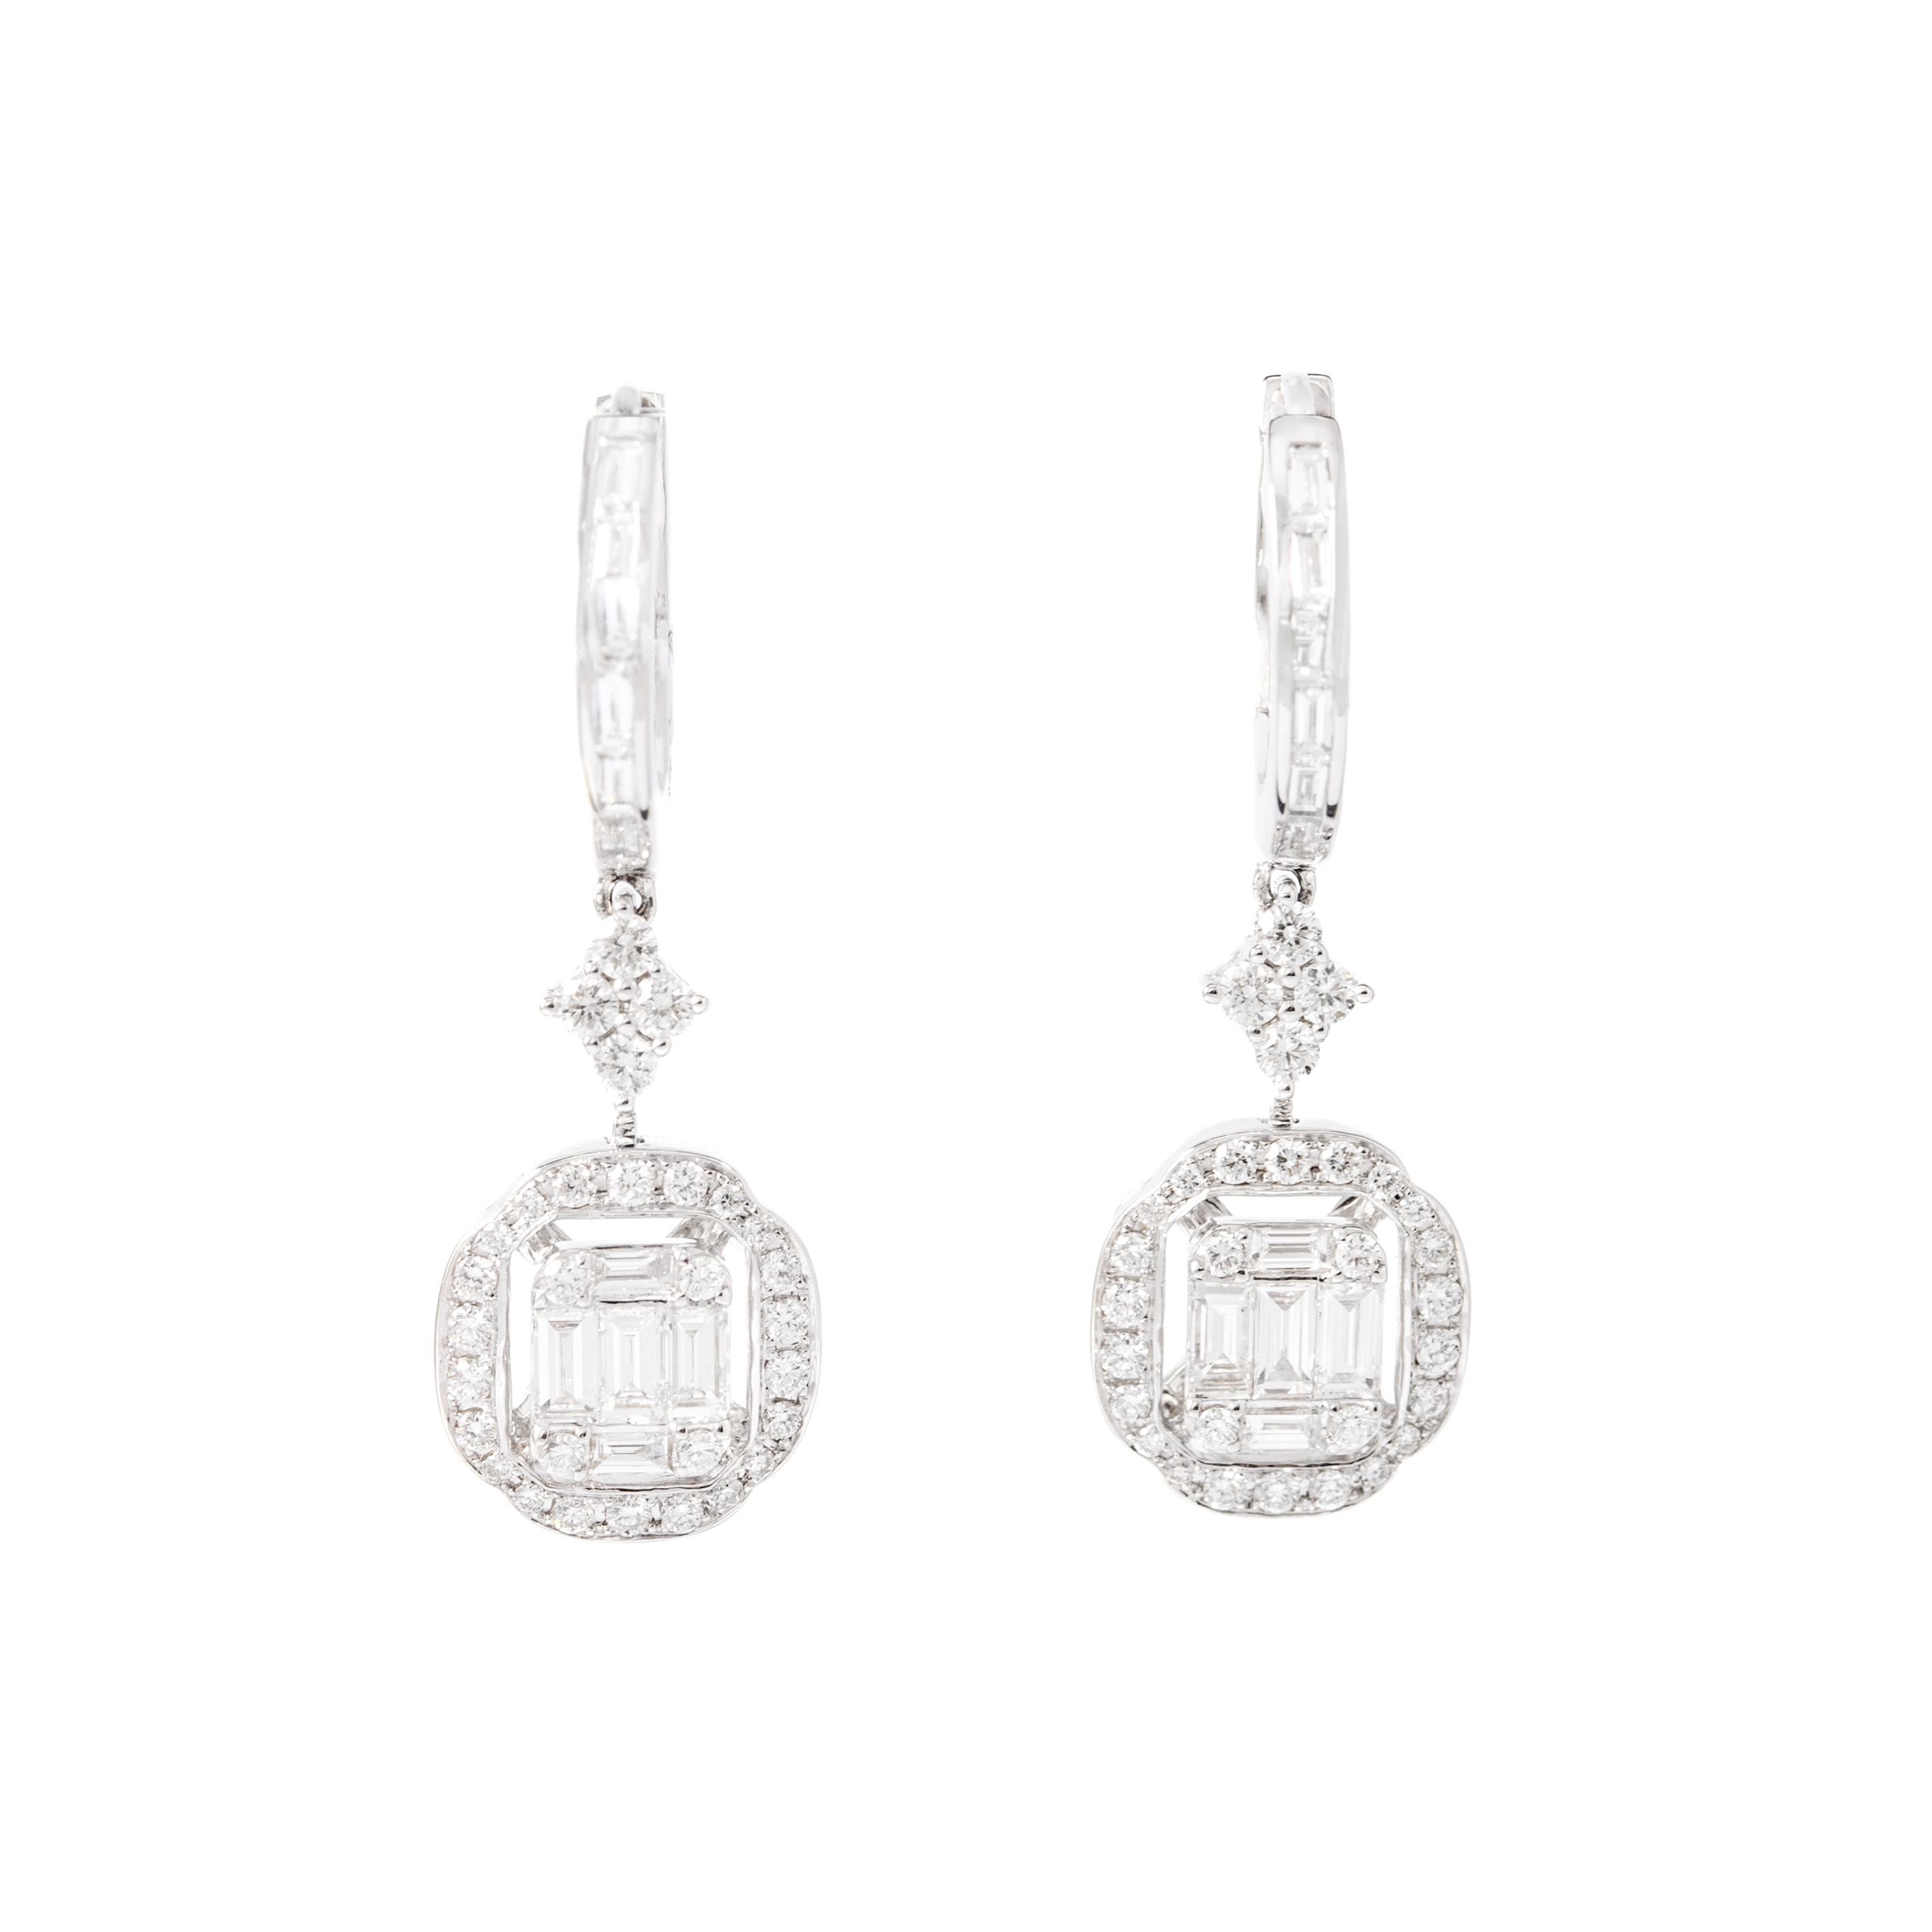 Earrings in 18kt white gold set with 60 diamonds 0.72 cts and 22 baguette cut diamonds 0.72 cts.

Length: 3.00 centimeters (1.18 inches).

Maximum Width: 1.00 centimeters (0.39 inches).

Total weight: 6.23 grams.